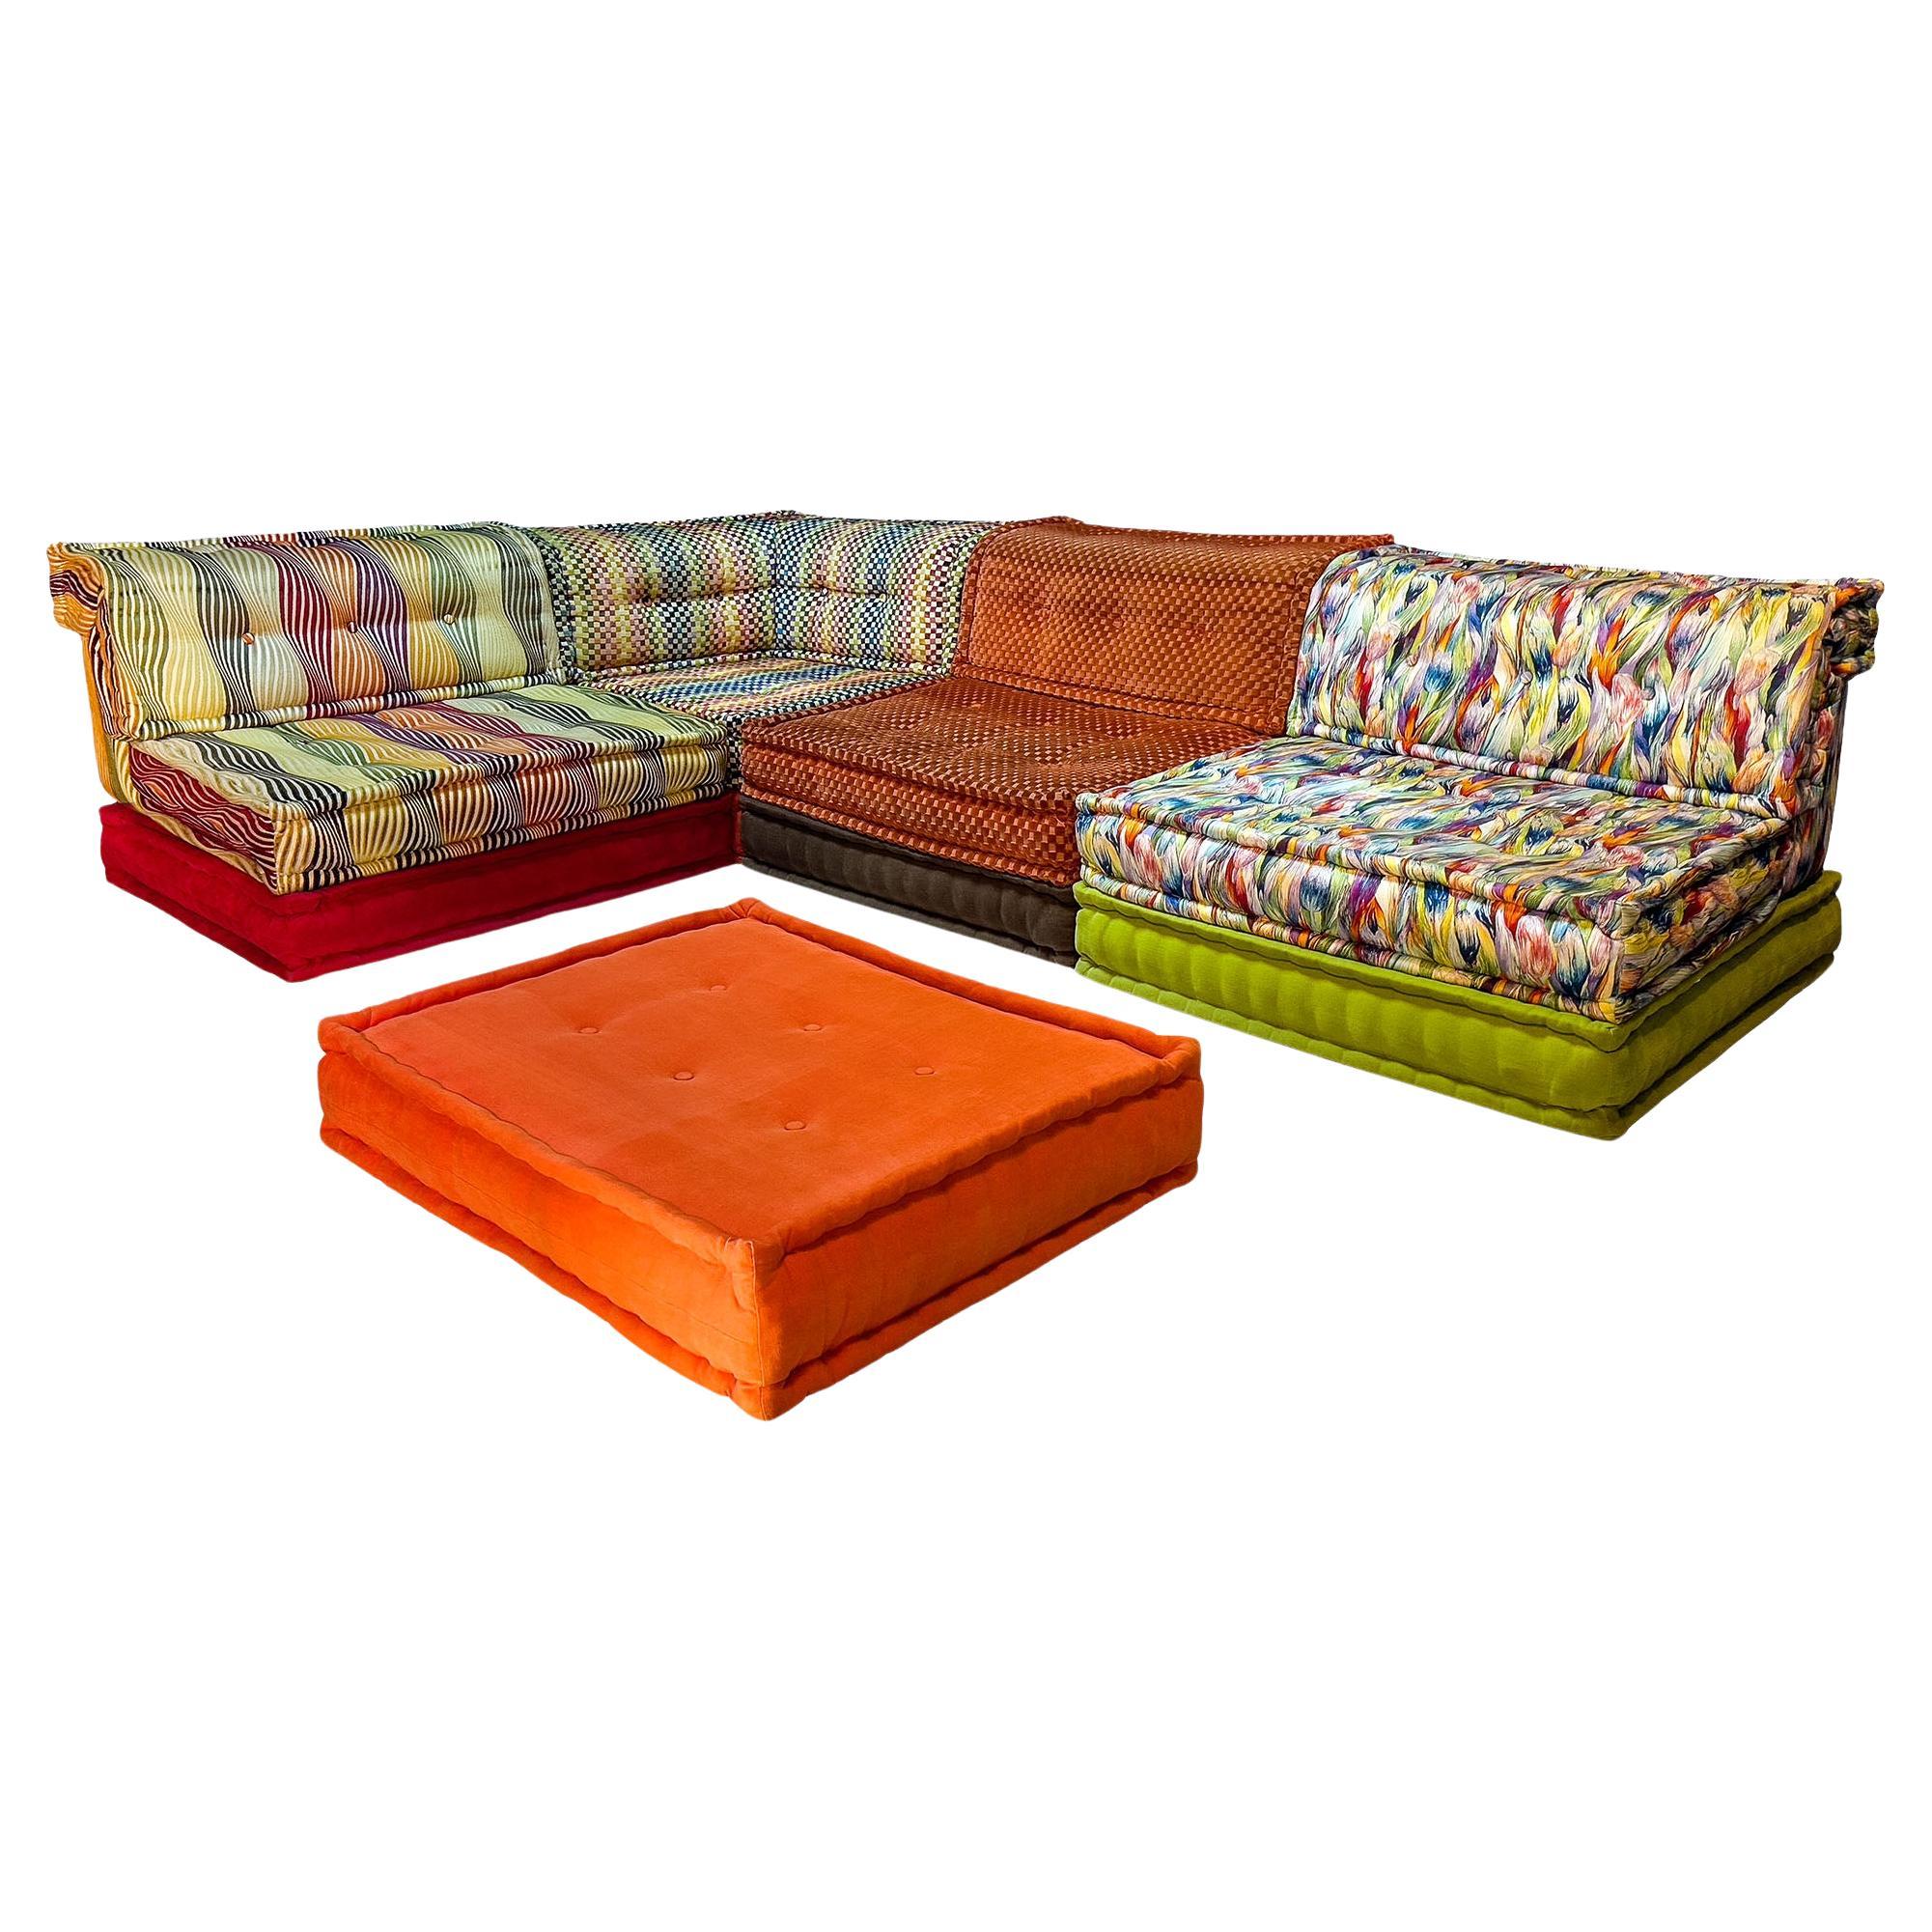 Modular Sofa Mah Jong by Missoni for Roche Bobois, set of 13 pieces, 2000s For Sale